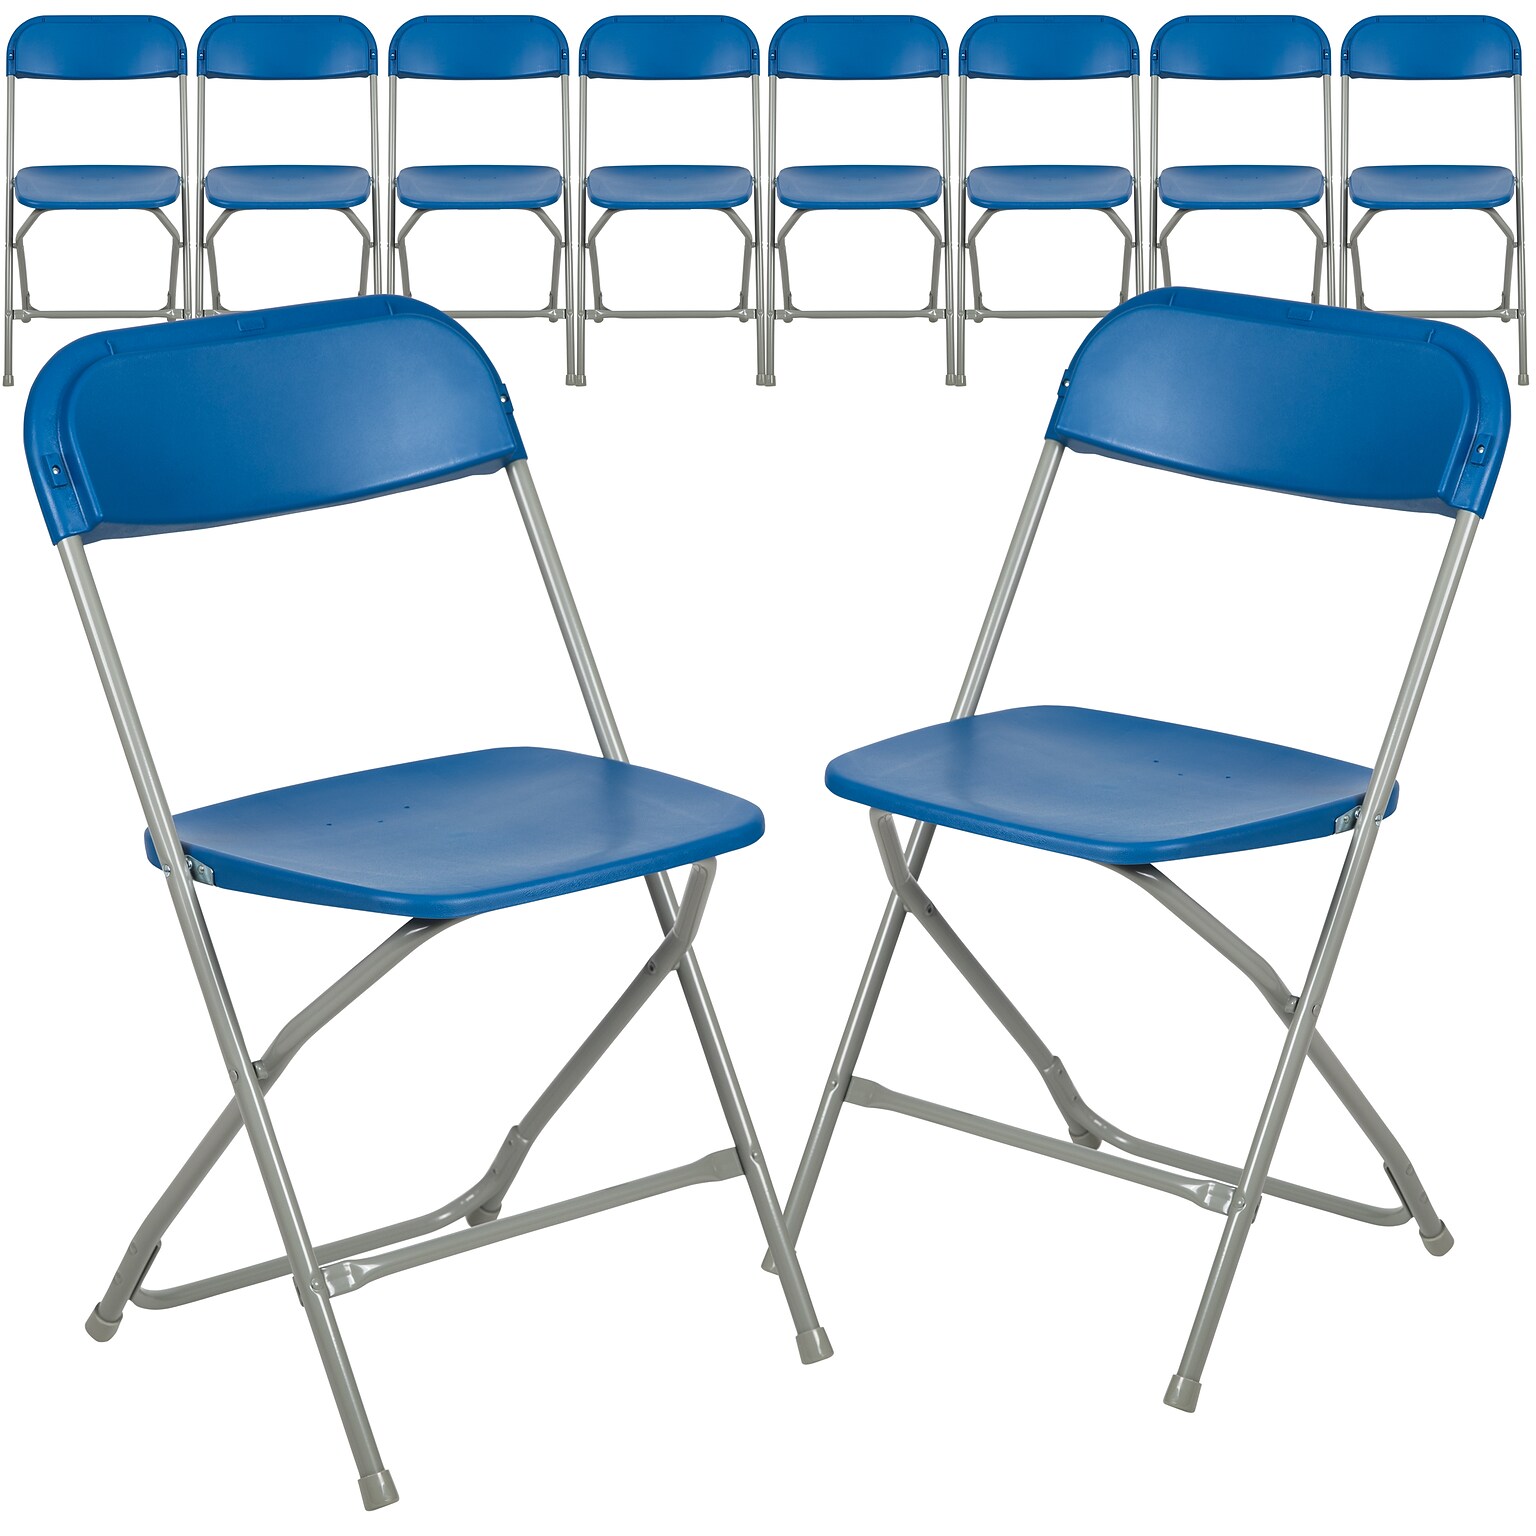 Flash Furniture HERCULES Premium Catering Events/Game Night/School/Wedding/Barbecue Stacking & Folding Chair, Blue/Gray